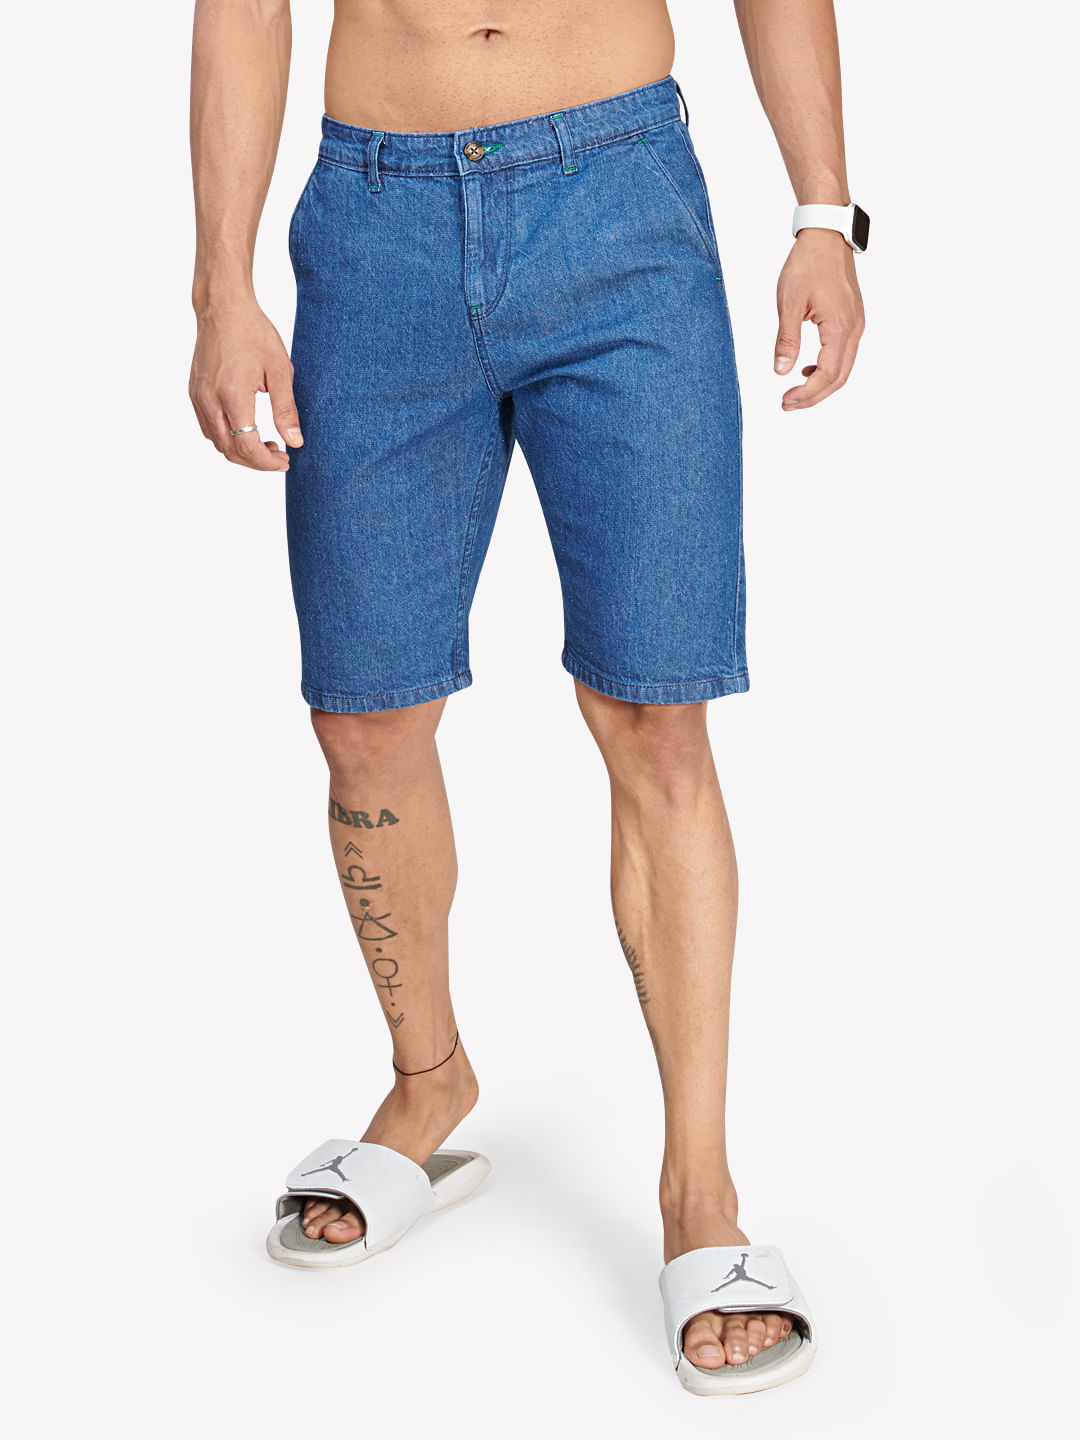 Buy Forca By Lifestyle Men Mid Rise Washed Denim Shorts - Shorts for Men  21809380 | Myntra